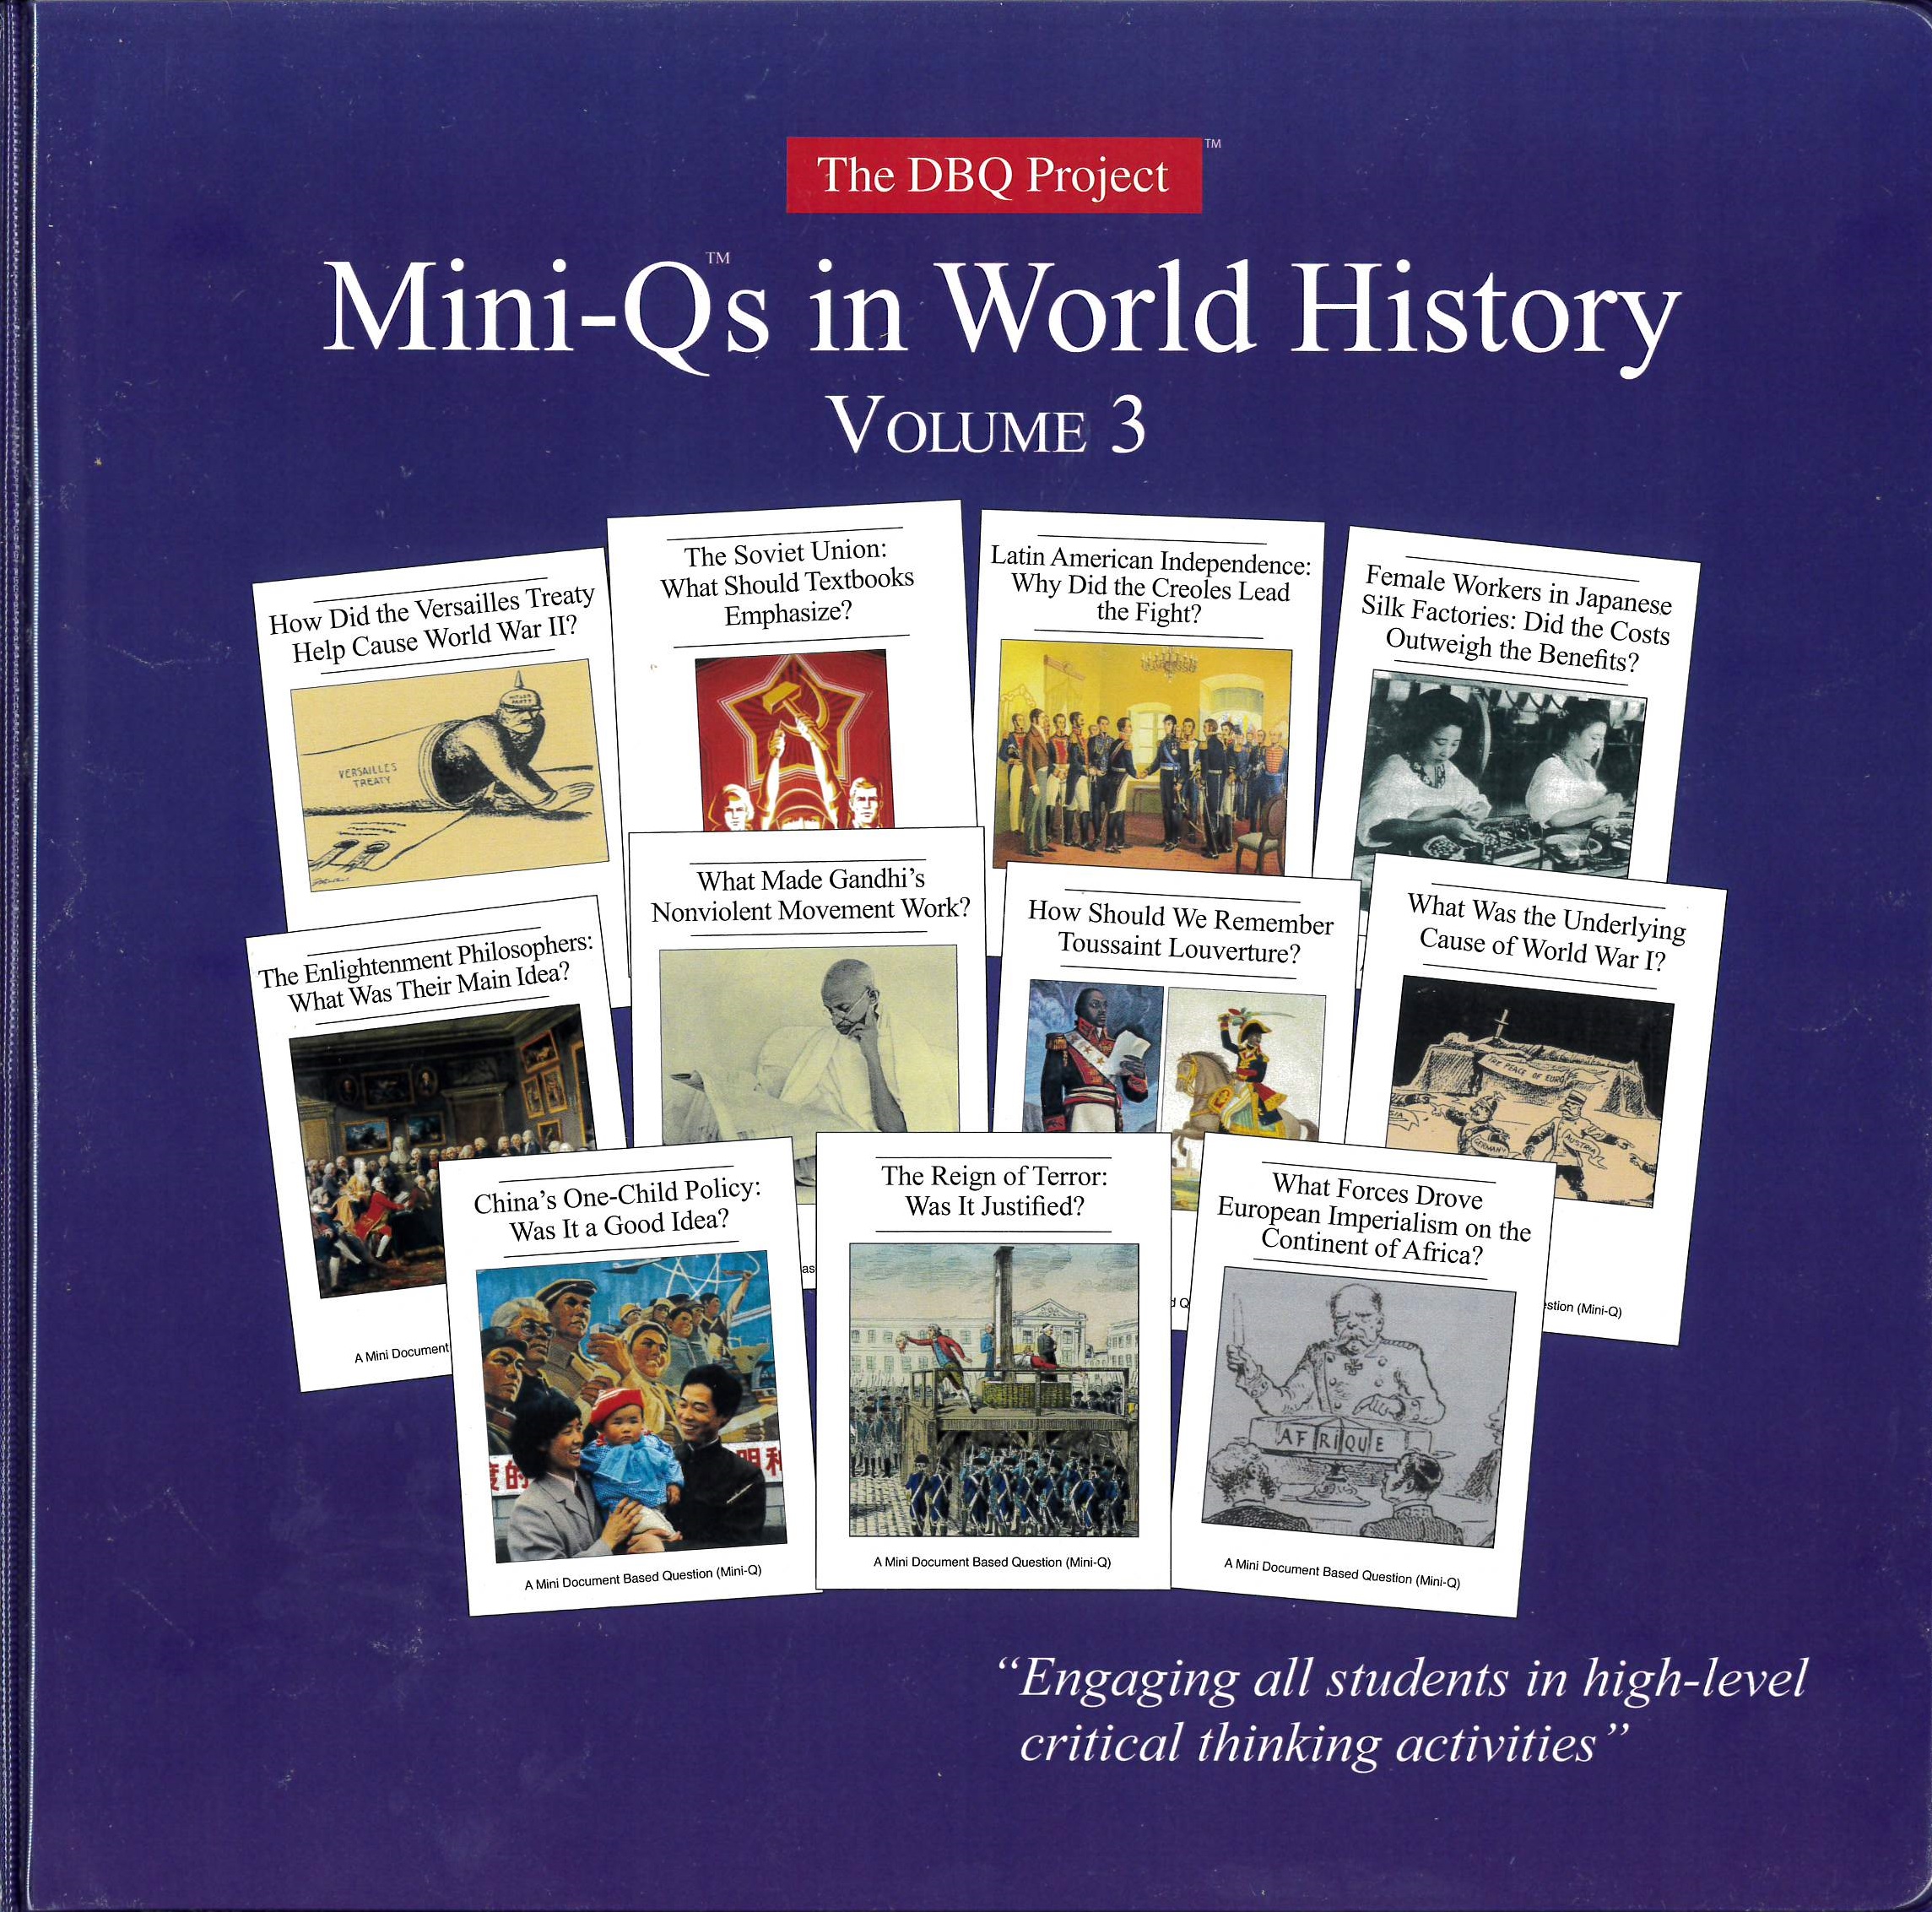 Mini-Qs in world history volume 3 : engaging all students in high-level critical thinking activities